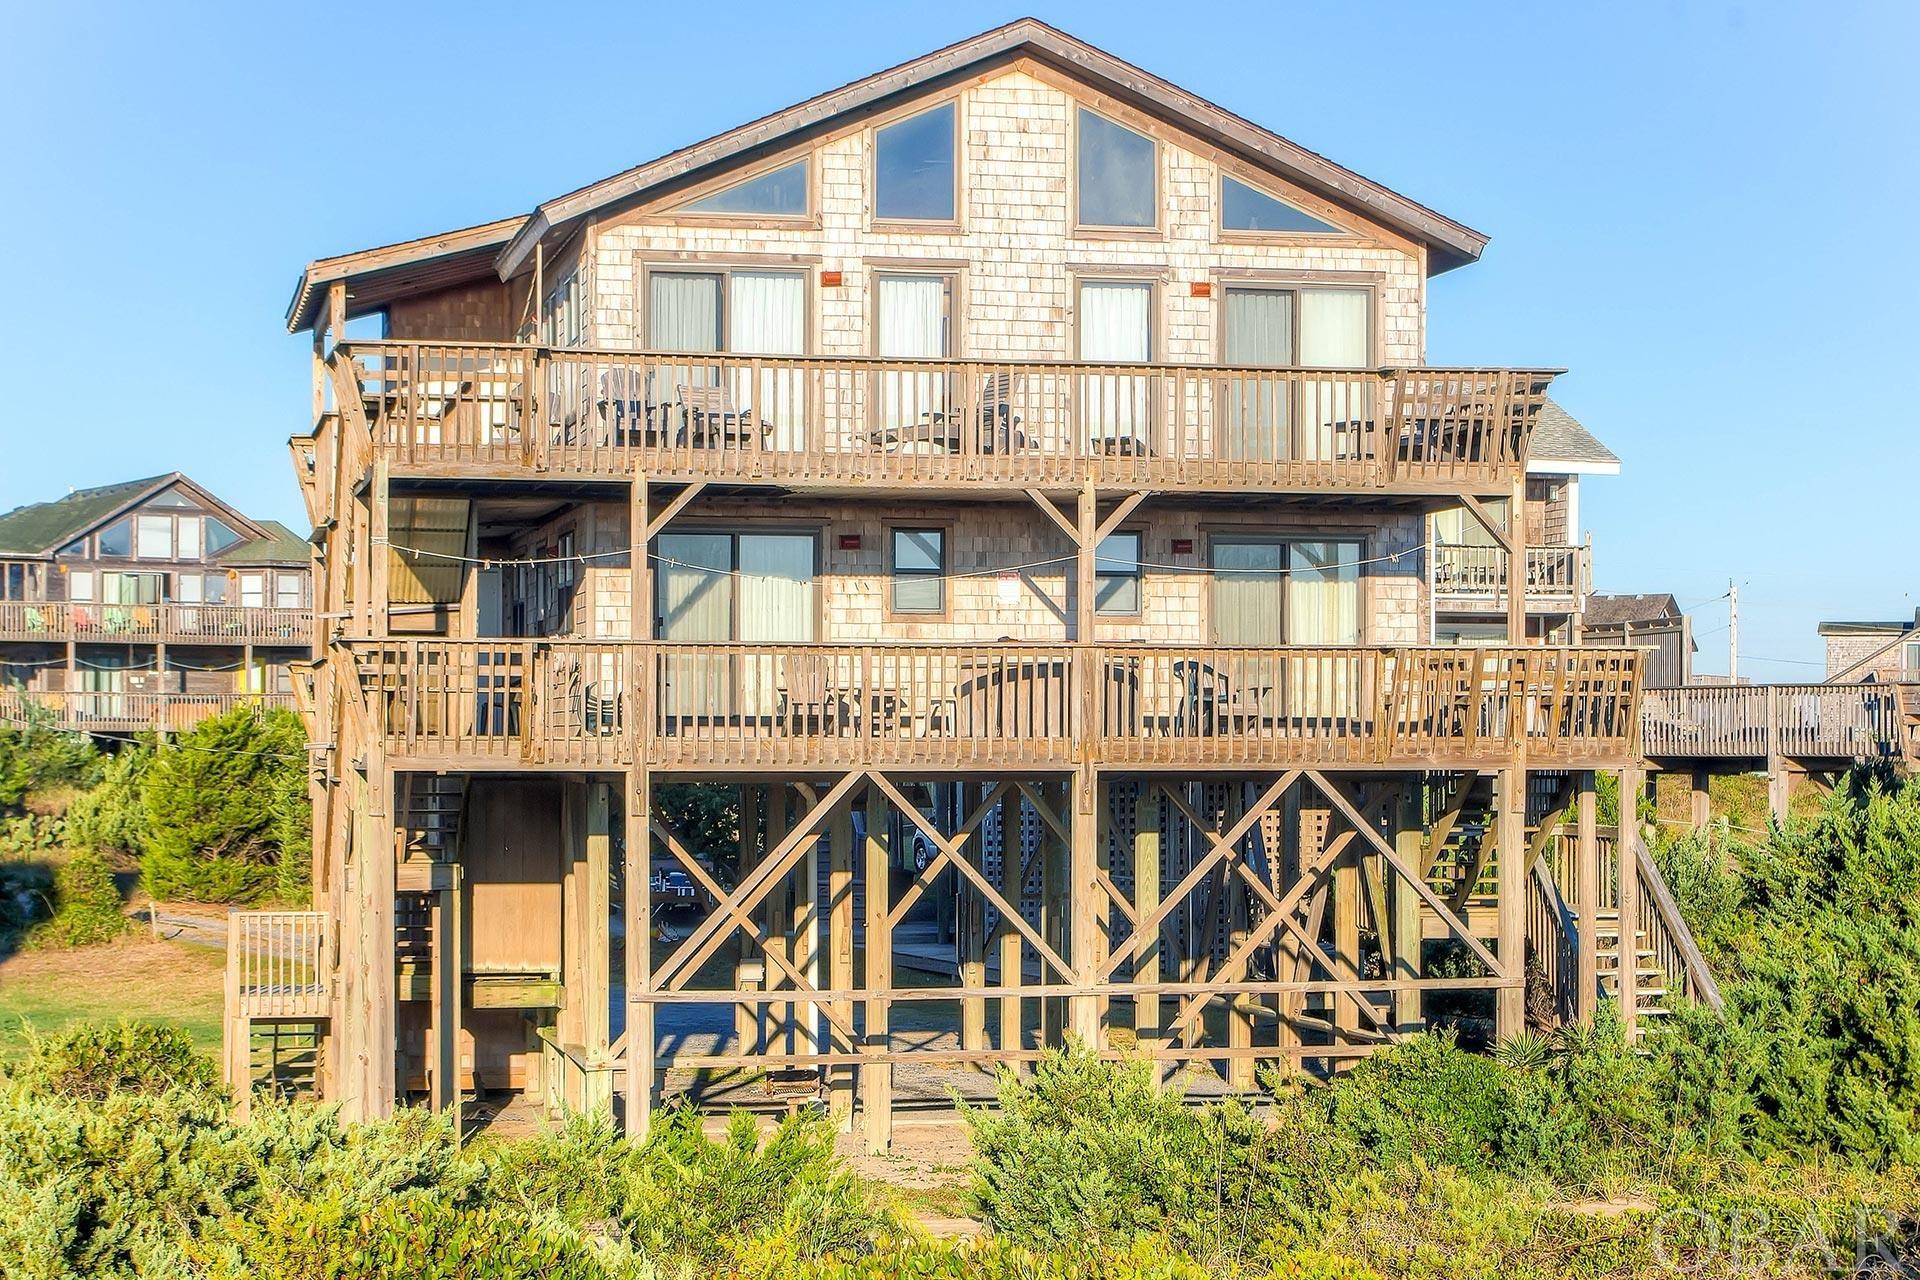 Looking for an unforgettable oceanfront vacation home? Look no further than 39289 N Kinnakeet Drive in Avon, NC!  Back on the market through no fault of the seller.  This stunning 4-bedroom, 3-bathroom home offers BREATHTAKING 180 degree unobstructed views of the Atlantic Ocean.  There is an elevator that opens on each floor for easy and convenient access.  There are ocean views from both of the East facing 2nd level bedrooms as well as the hot tub on the covered 2nd level deck.  Up on the main level, you'll be blown away by the AMAZING ocean views from the wall of windows in the living area.  The great room is spacious and perfect for entertaining guests, with plenty of room for everyone to relax and take in the incredible ocean views.  Step out onto the expansive deck to take in the ocean breeze and enjoy the relaxing sound of crashing waves.  When it's time to head to the beach, you'll be amazed at how wide and clean it is, with substantial dunes offering plenty of protection. It's the perfect spot to spend lazy days lounging in the sun, playing in the waves, or building sandcastles with the kids.  Don't miss your chance to experience true coastal living at its finest.